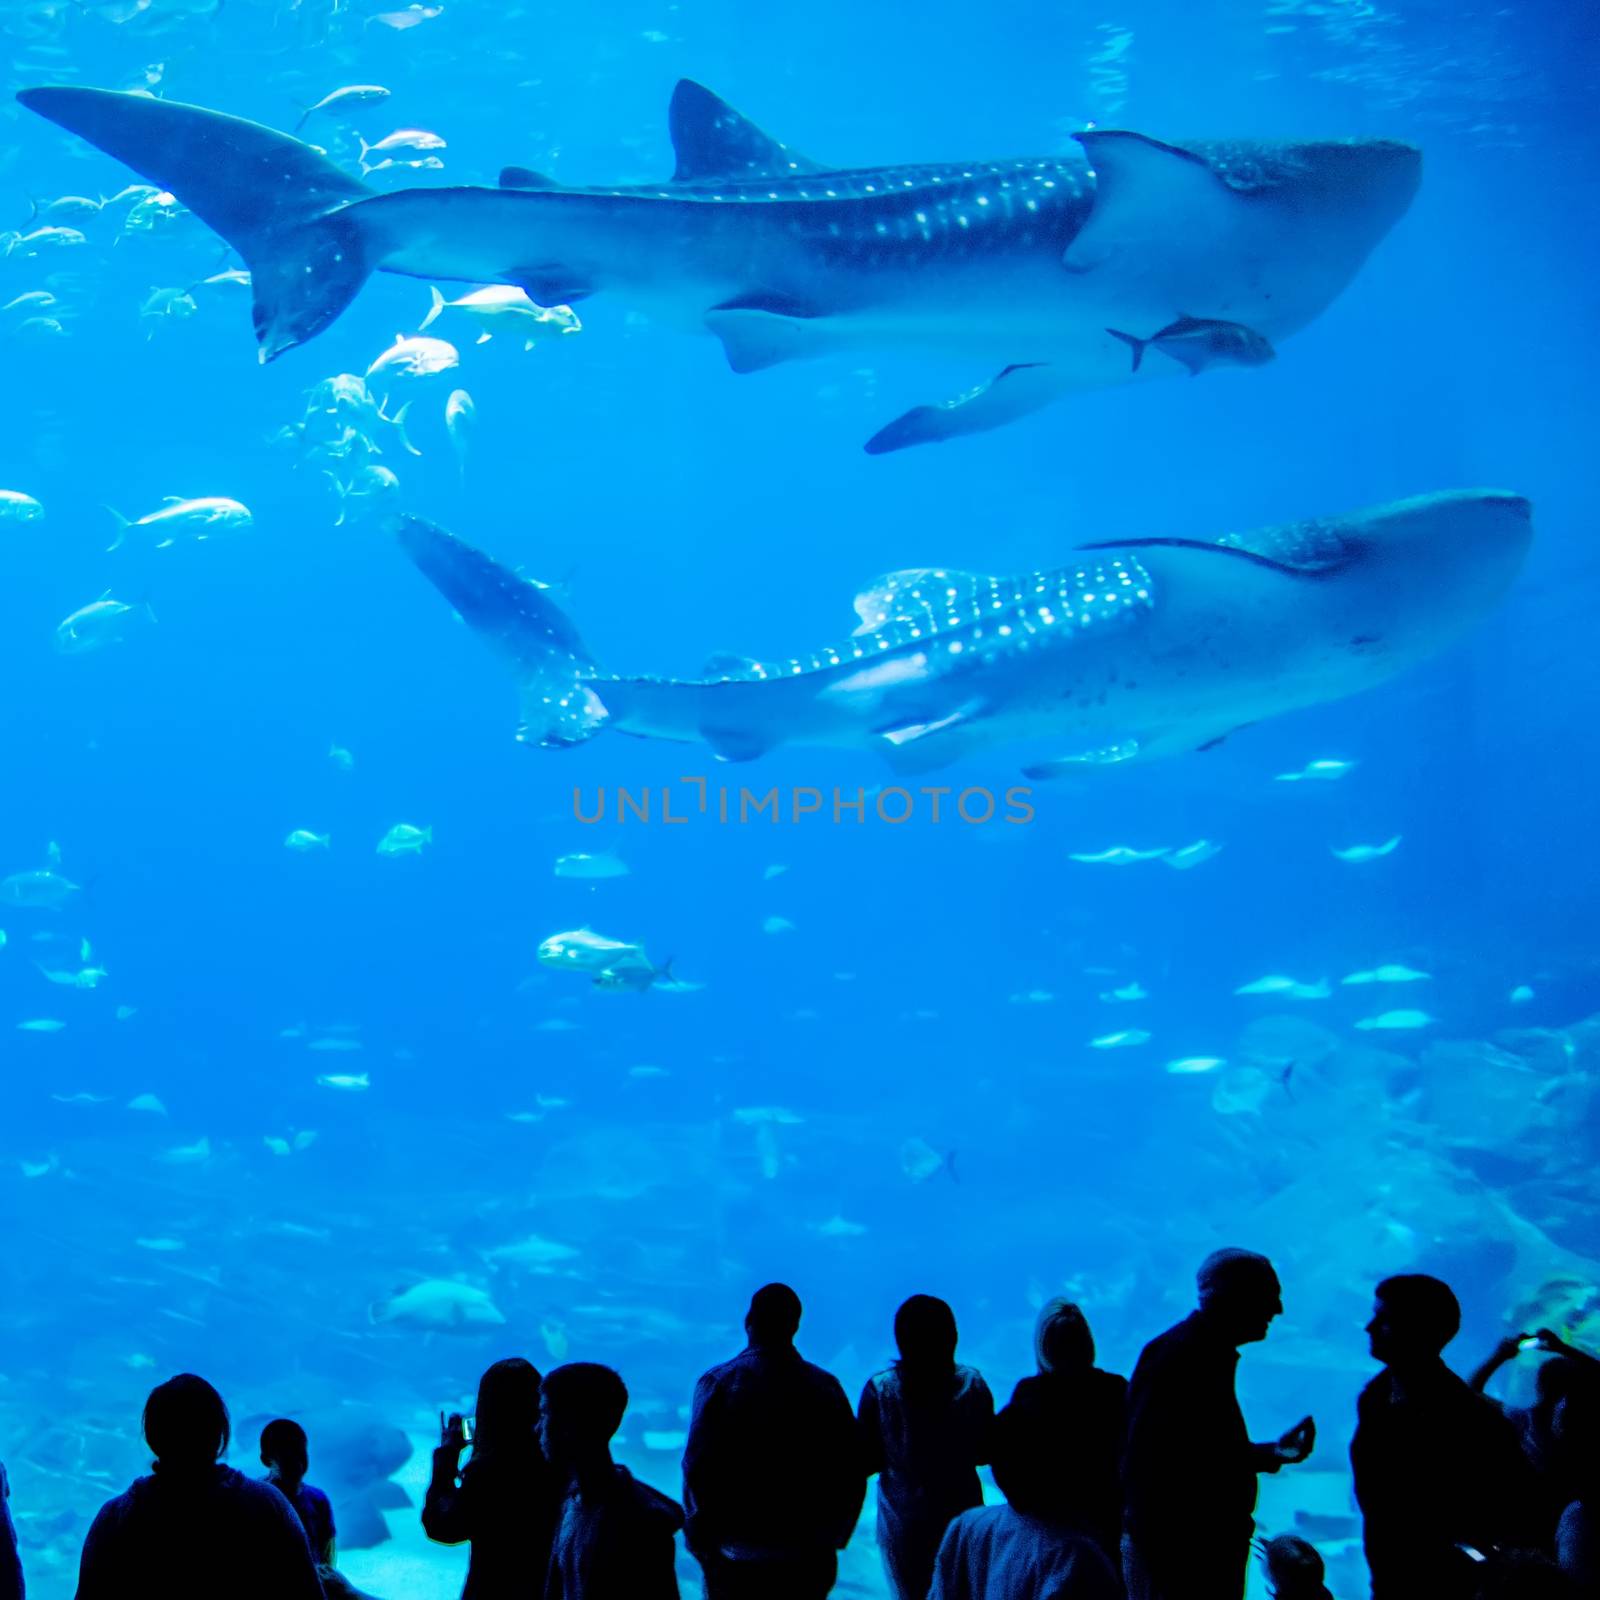 whale sharks swimming in aquarium with people observing by digidreamgrafix